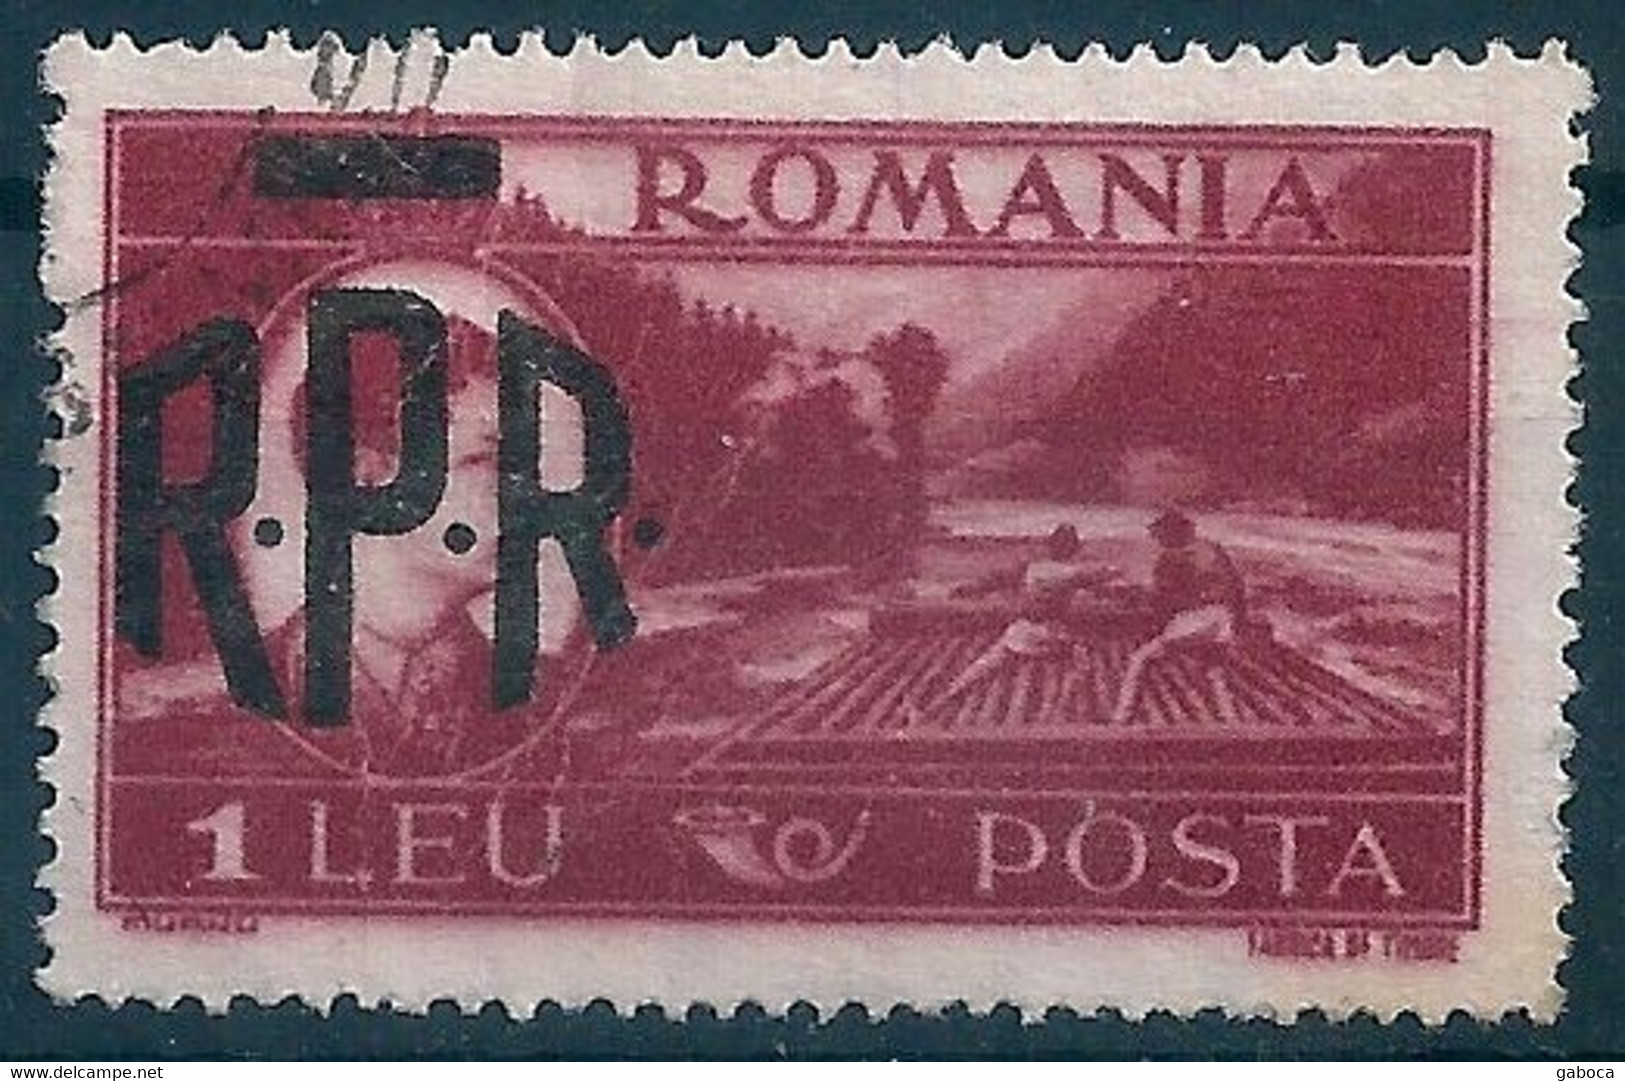 C0422 Romania Economy Agriculture Harvest Forestry Animal Ploughing Used 30xStamp Lot#453